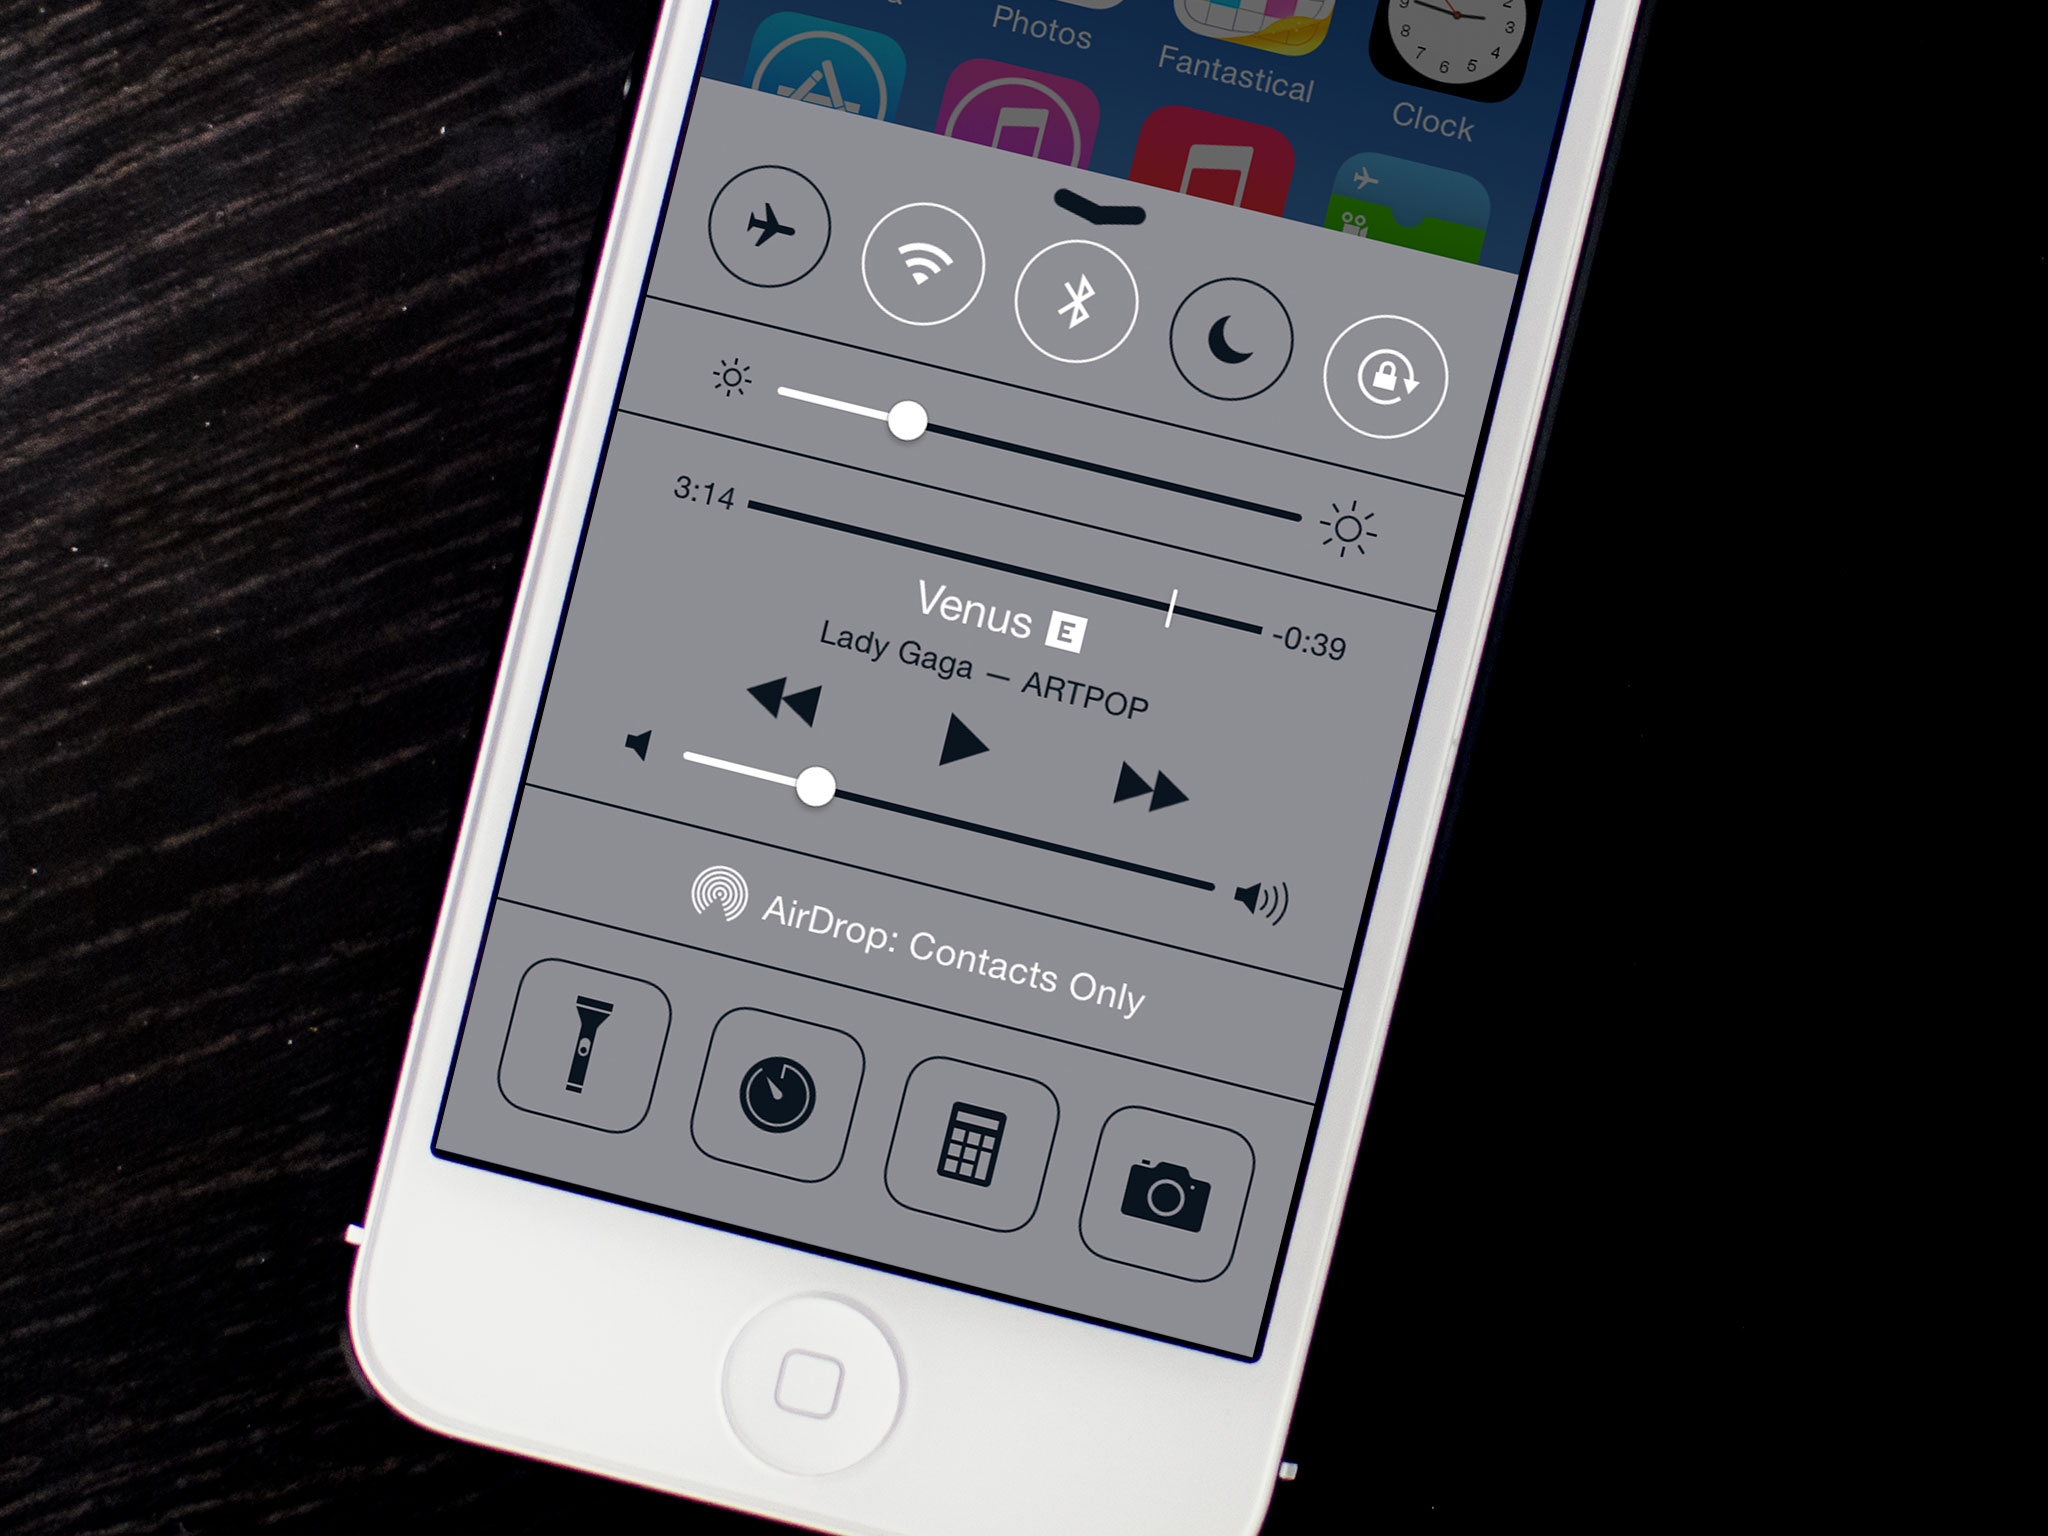 How to reduce the transparency of keyboards, menus, and more in iOS 7.1